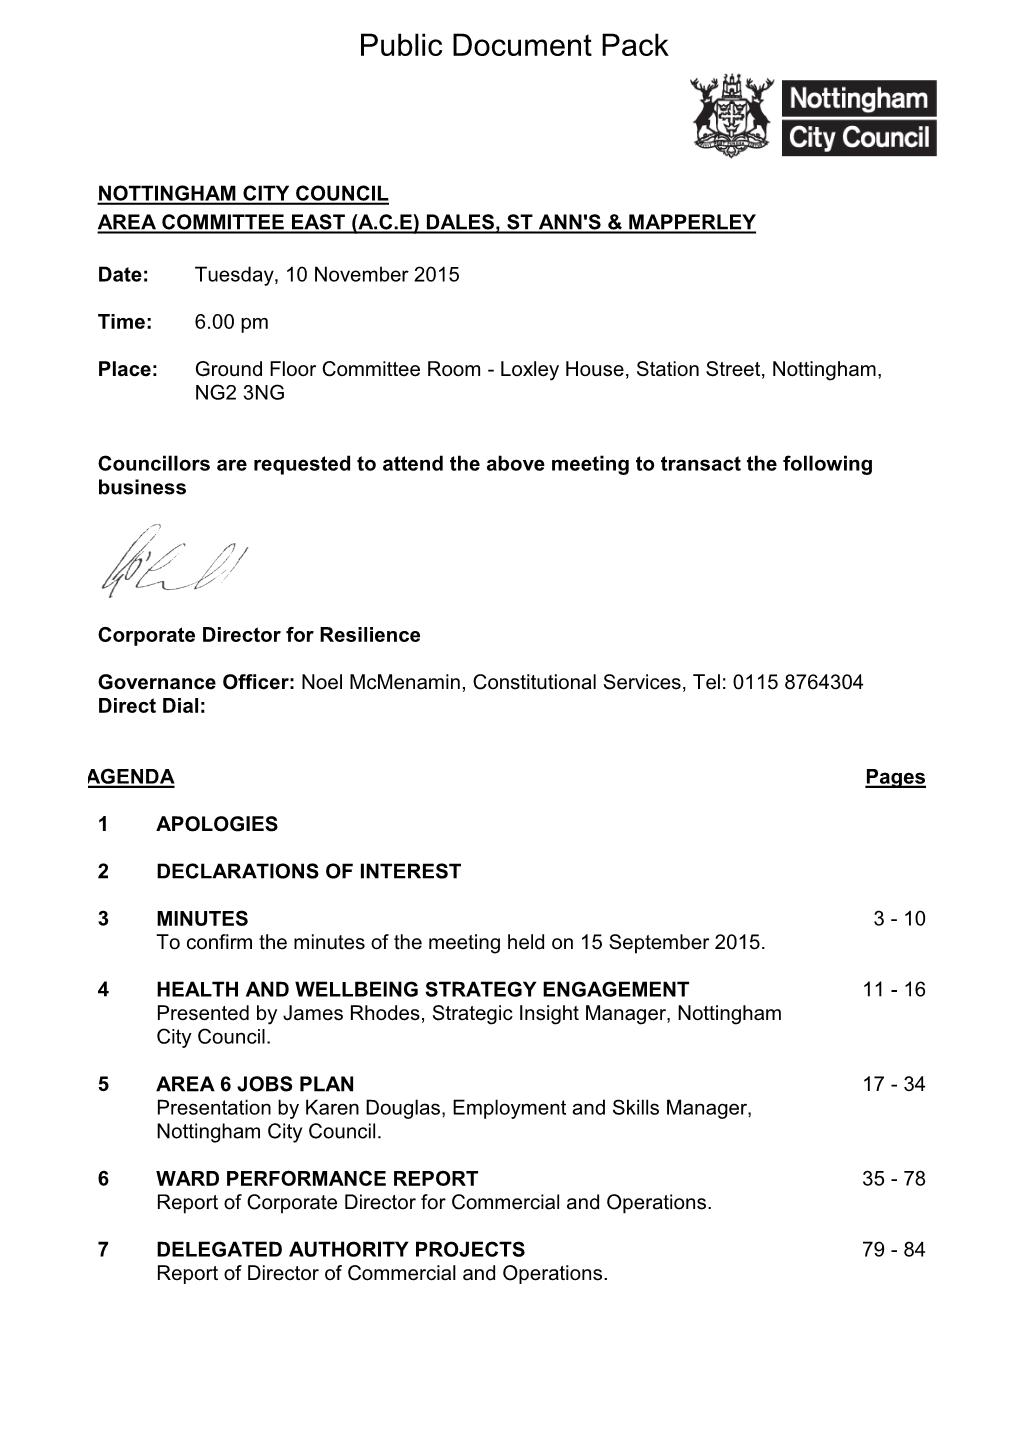 (Public Pack)Agenda Document for Area Committee East (A.C.E) Dales